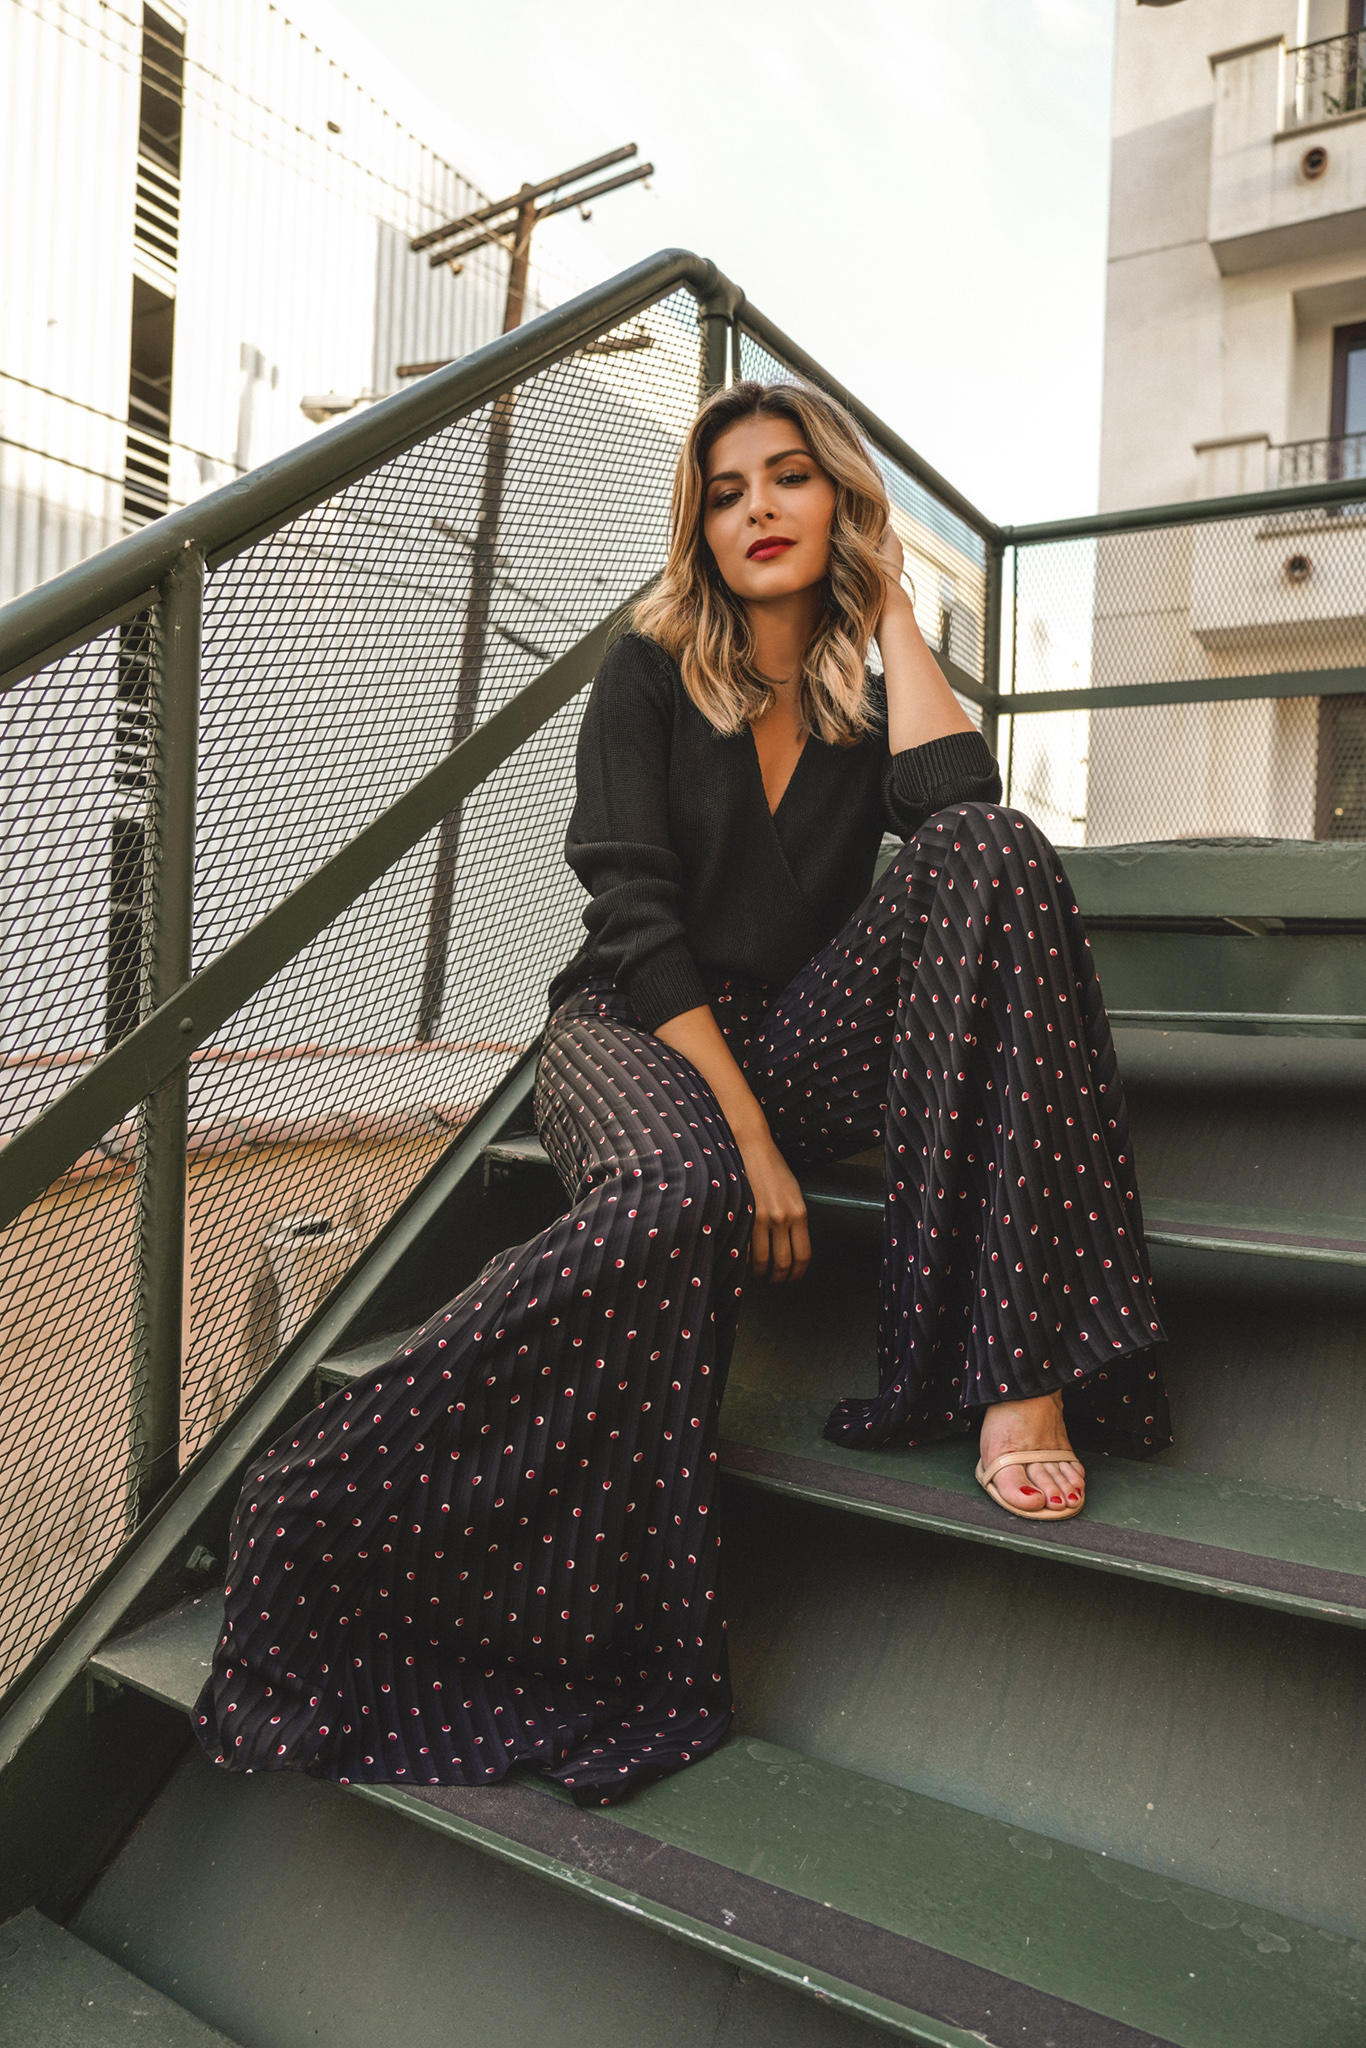 Fall Trousers You'll Wear All season Long by Pam Hetlinger | TheGirlFromPanama.com | Pleated Trousers, Printed Trousers, Fall outfit